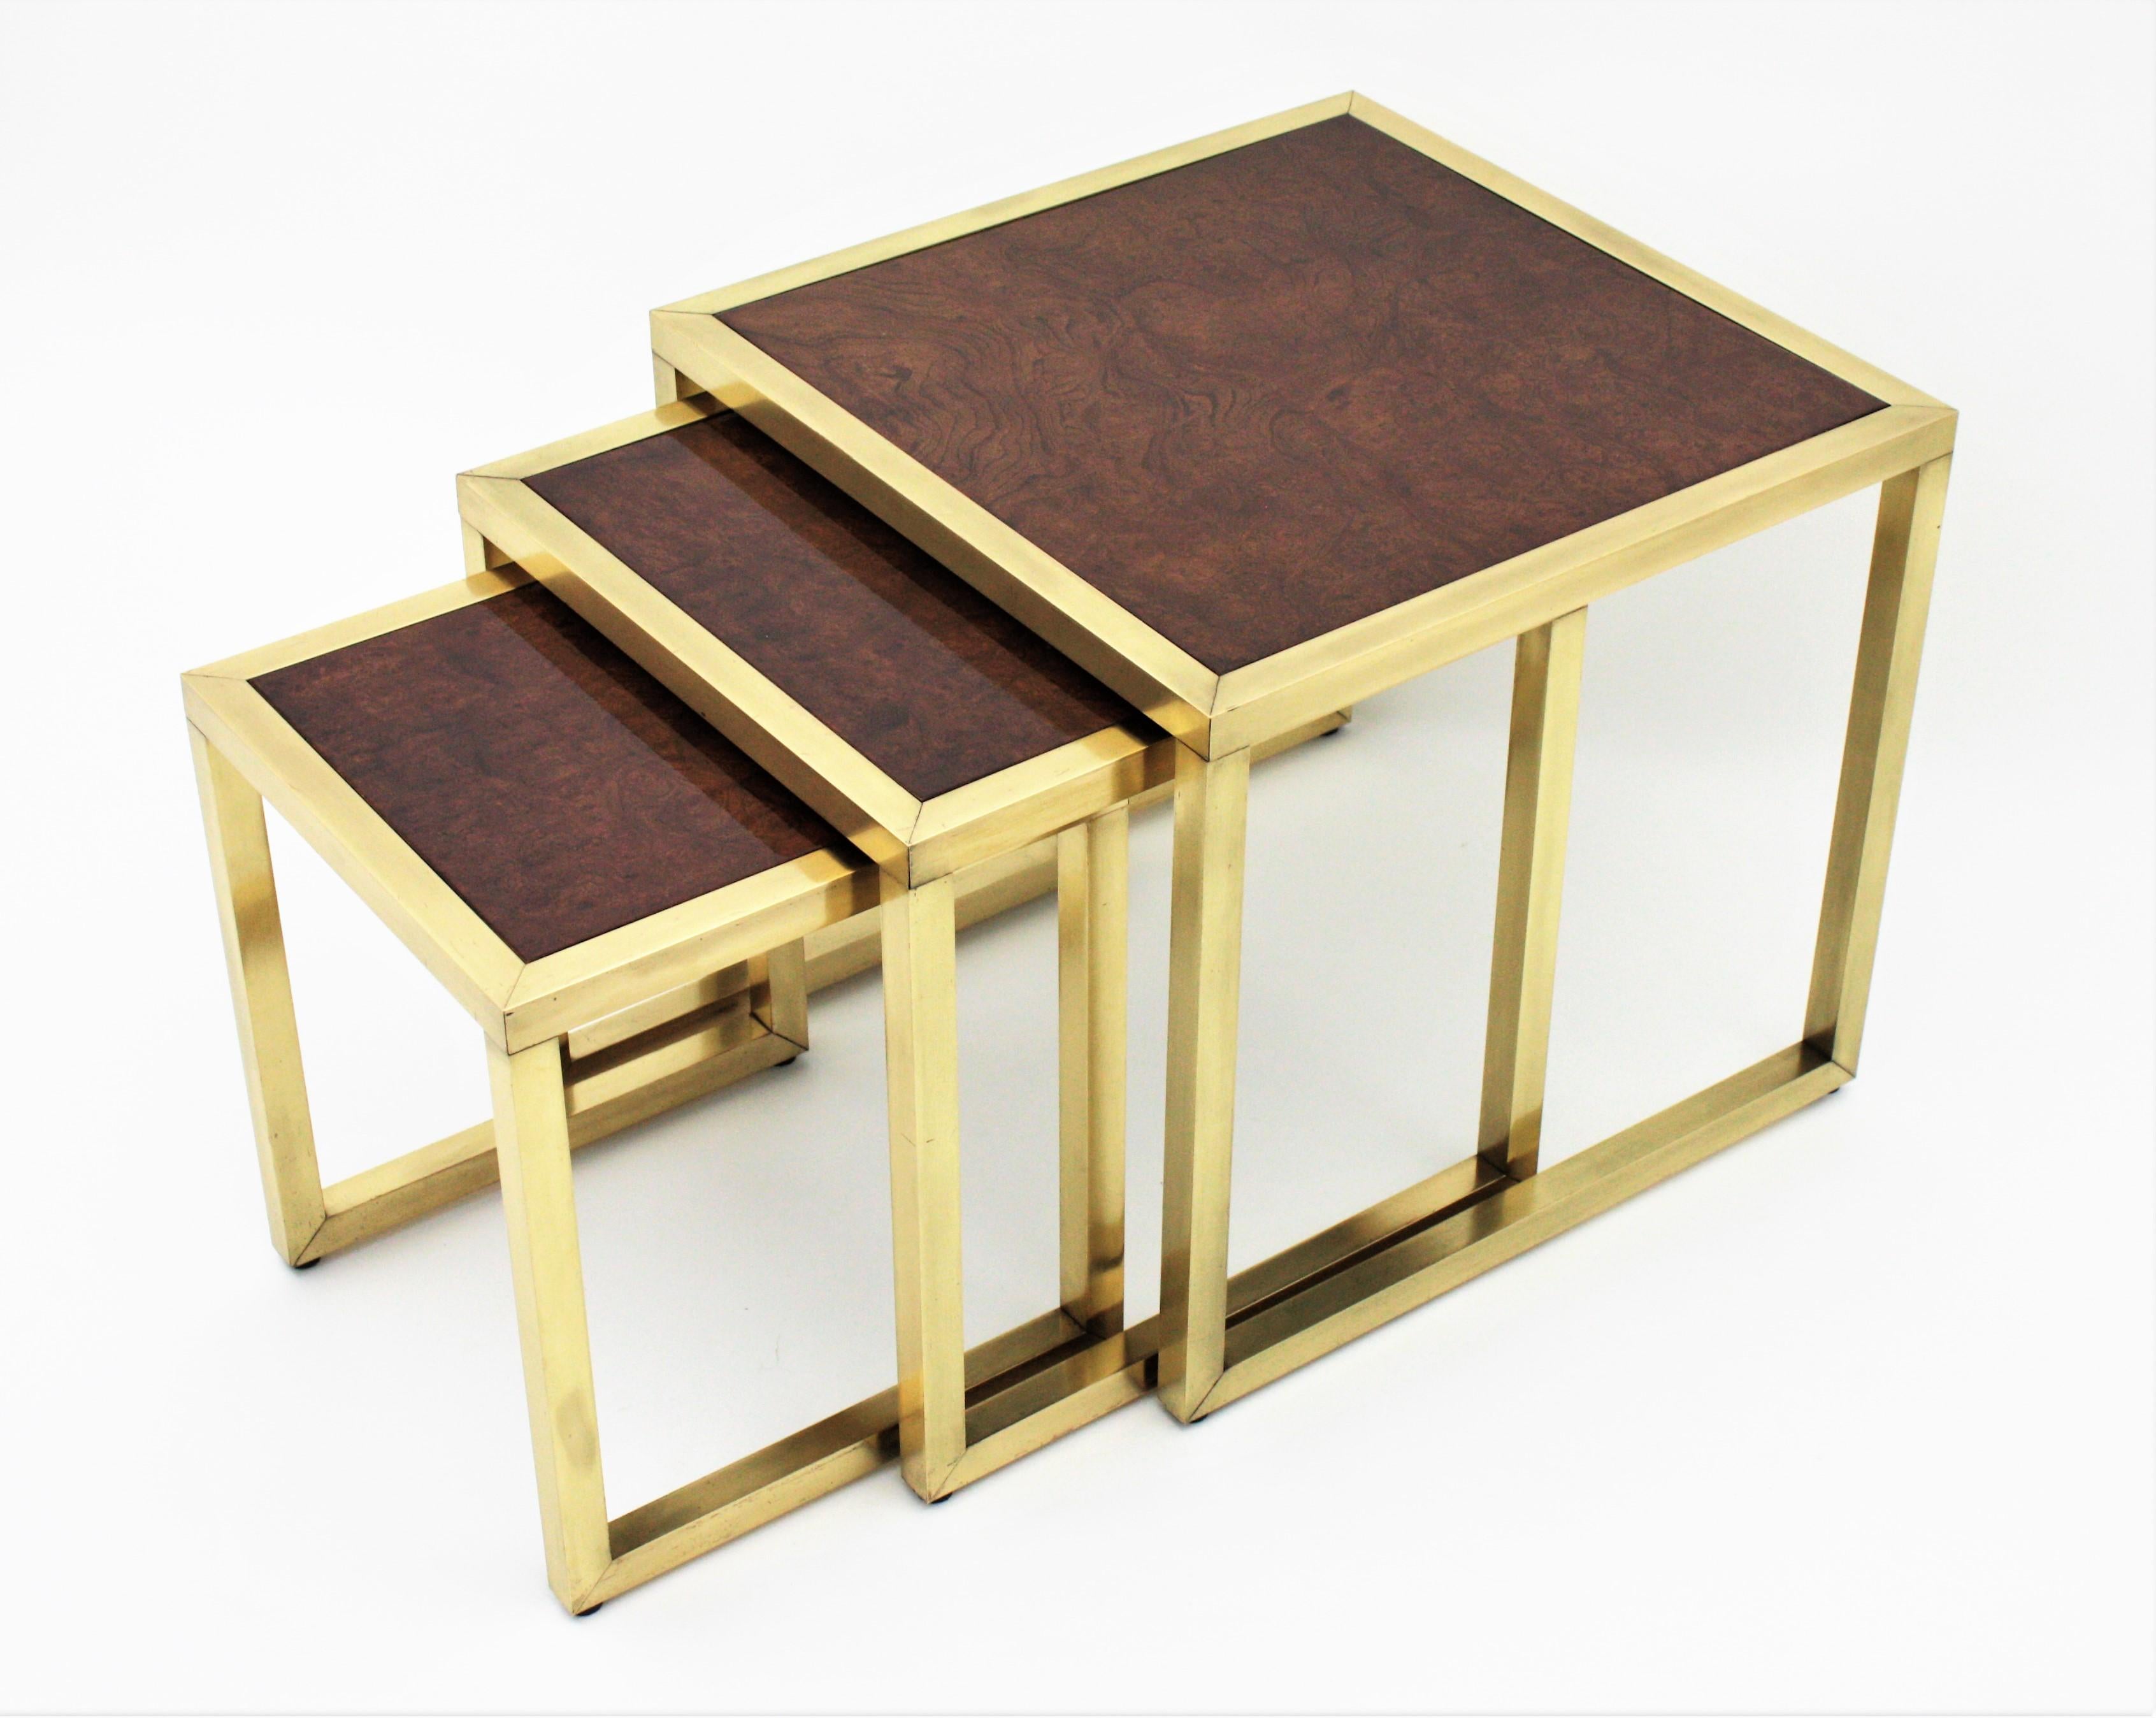 Elegant set of three ash burlwood and brass nest of tables, Spain, 1960s.
This nest of tables features a clean and great design in the style of Milo Baughman.
They will add a Modernist accent to any place and can be displayed as nesting tables or a